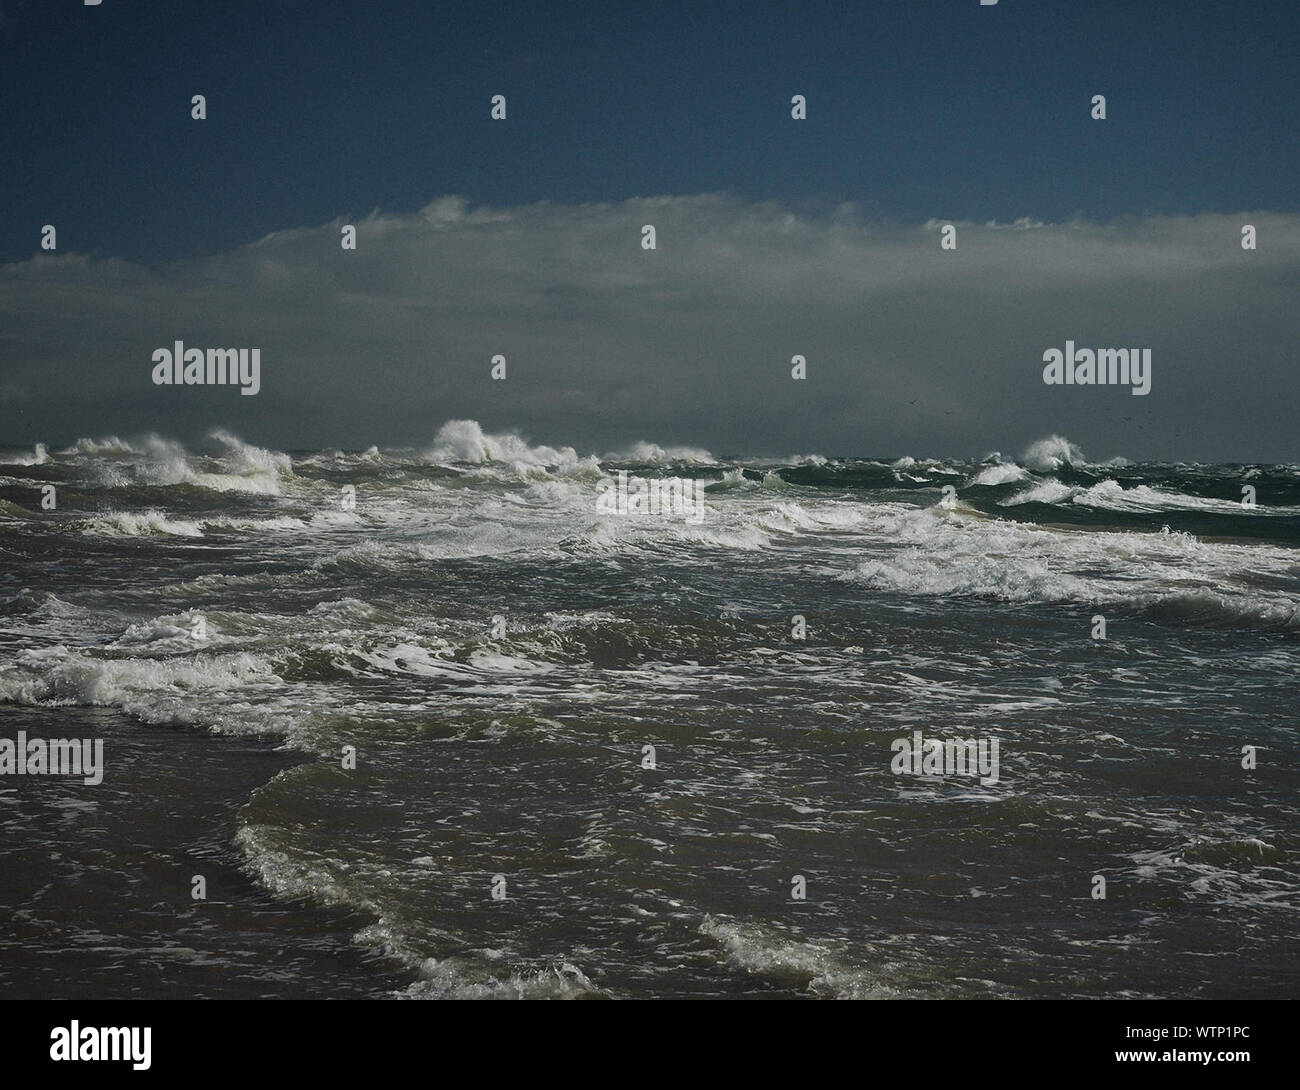 Scenic View Of Stormy Sea Against Cloudy Sky Stock Photo